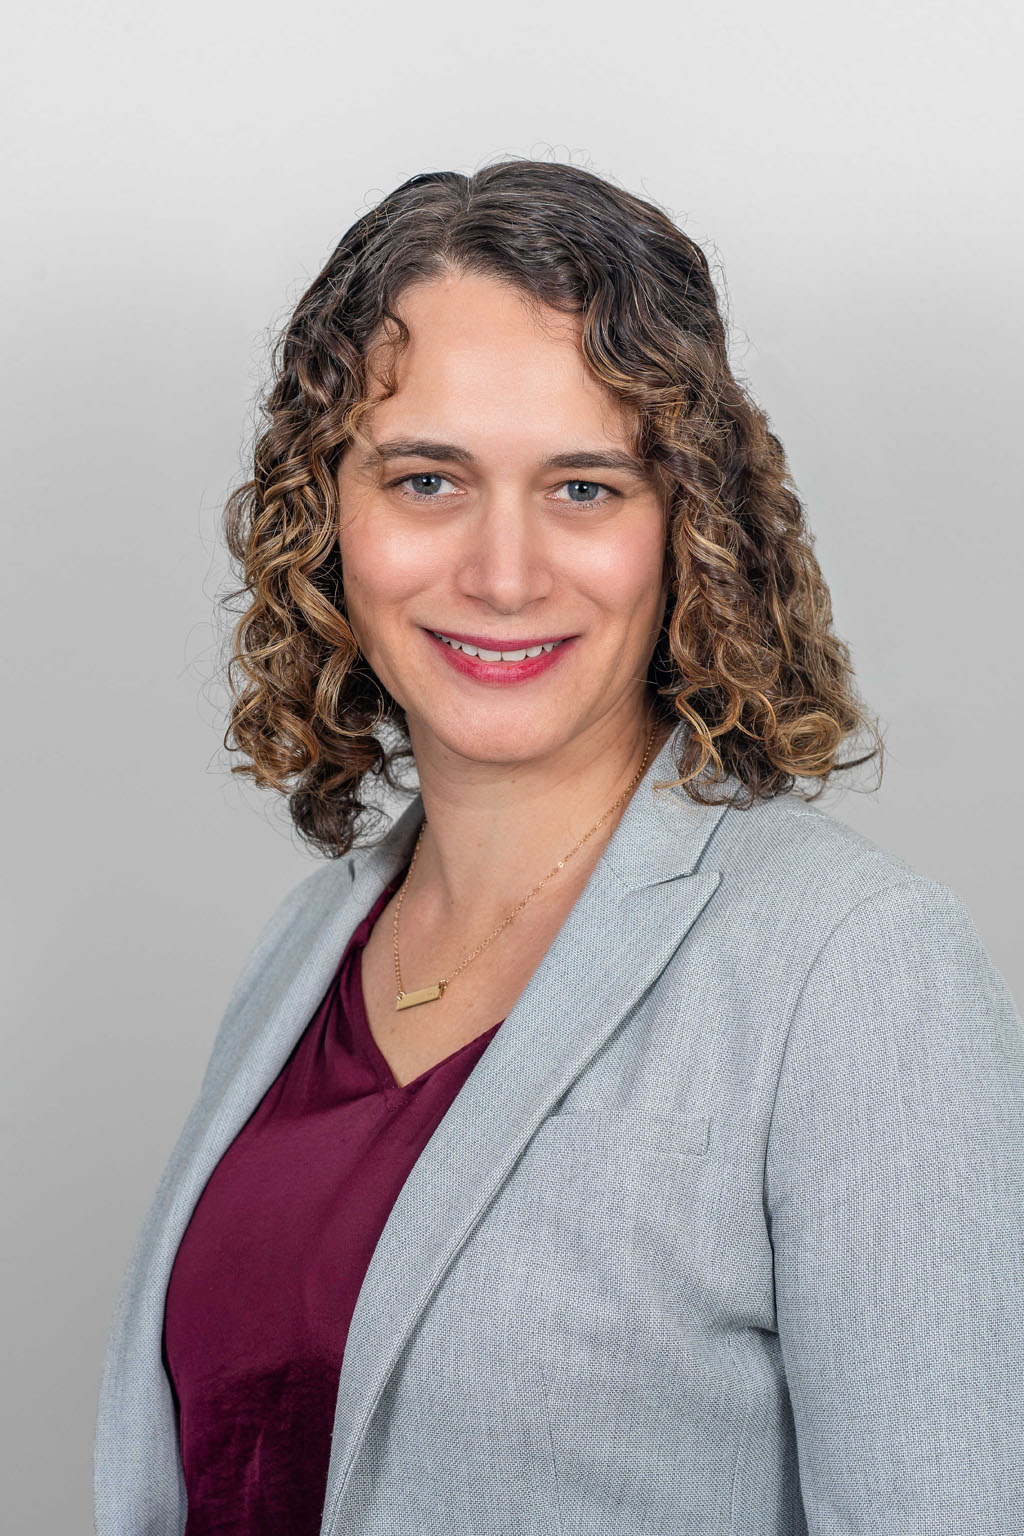 Nomi S. Weiss-Laxer, PhD, MPH, MA